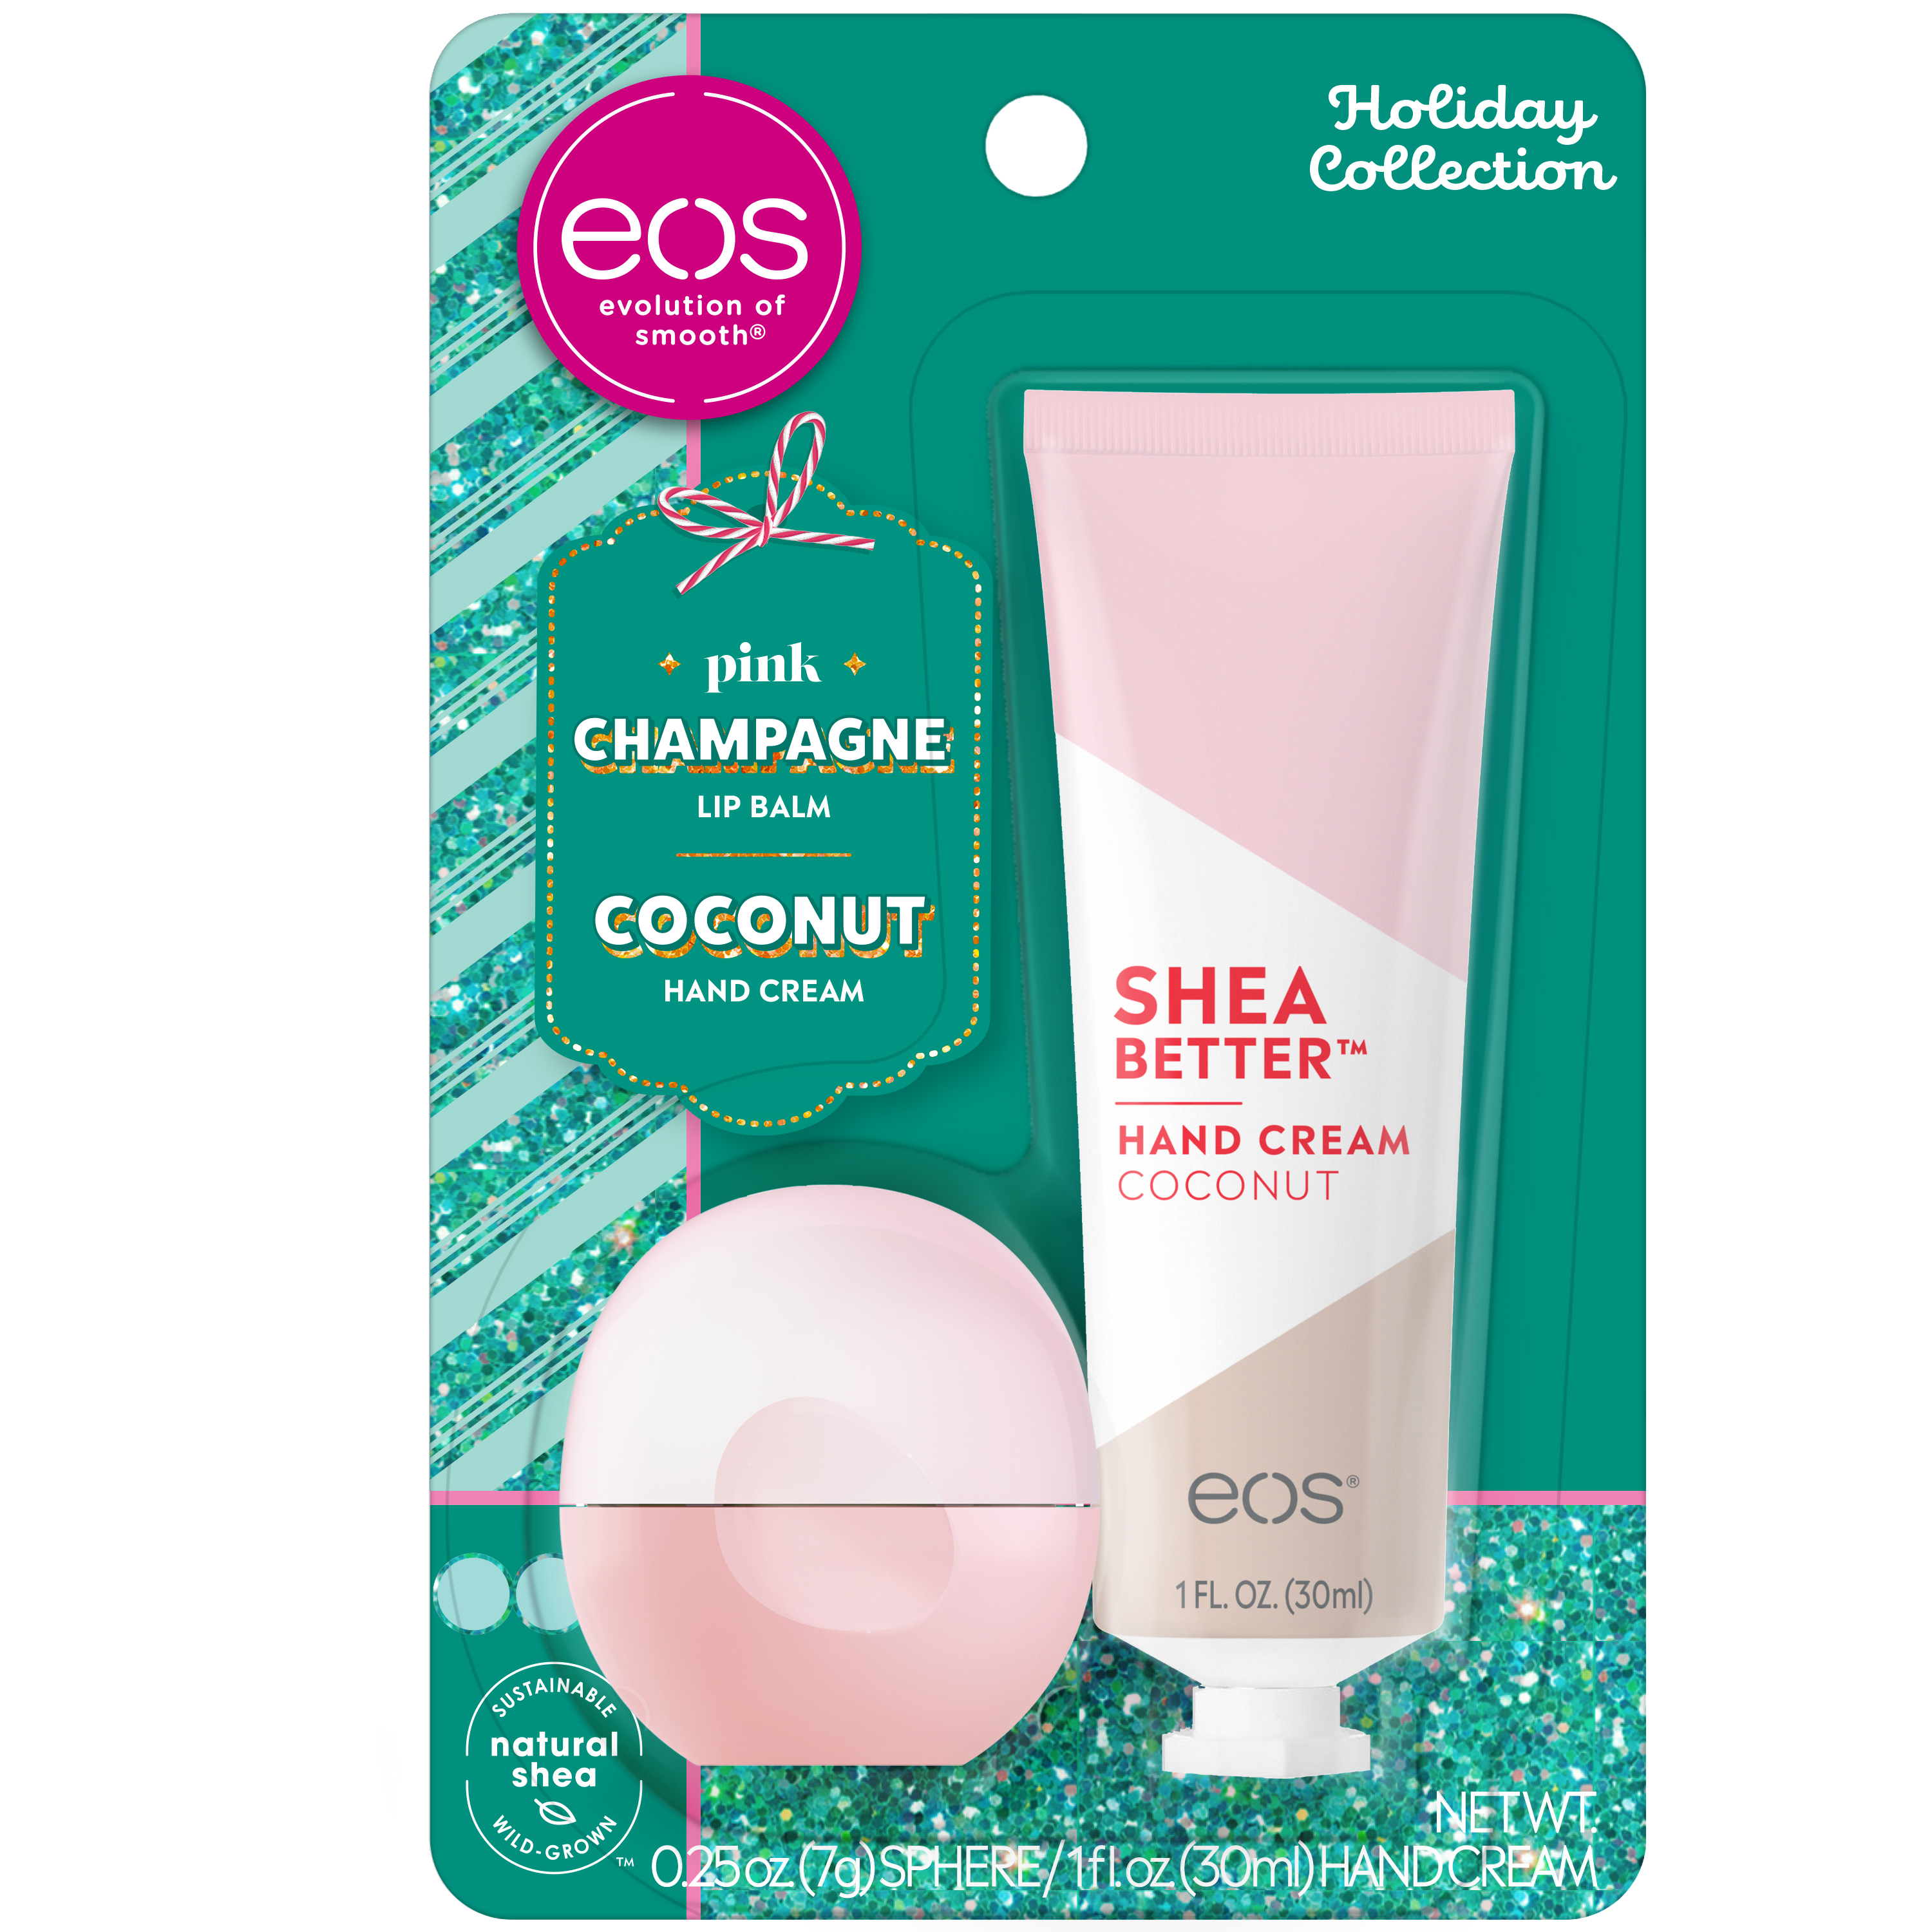 eos Holiday Lip Balm & Shea Better Hand Cream – Pink Champagne & Coconut - image 1 of 4